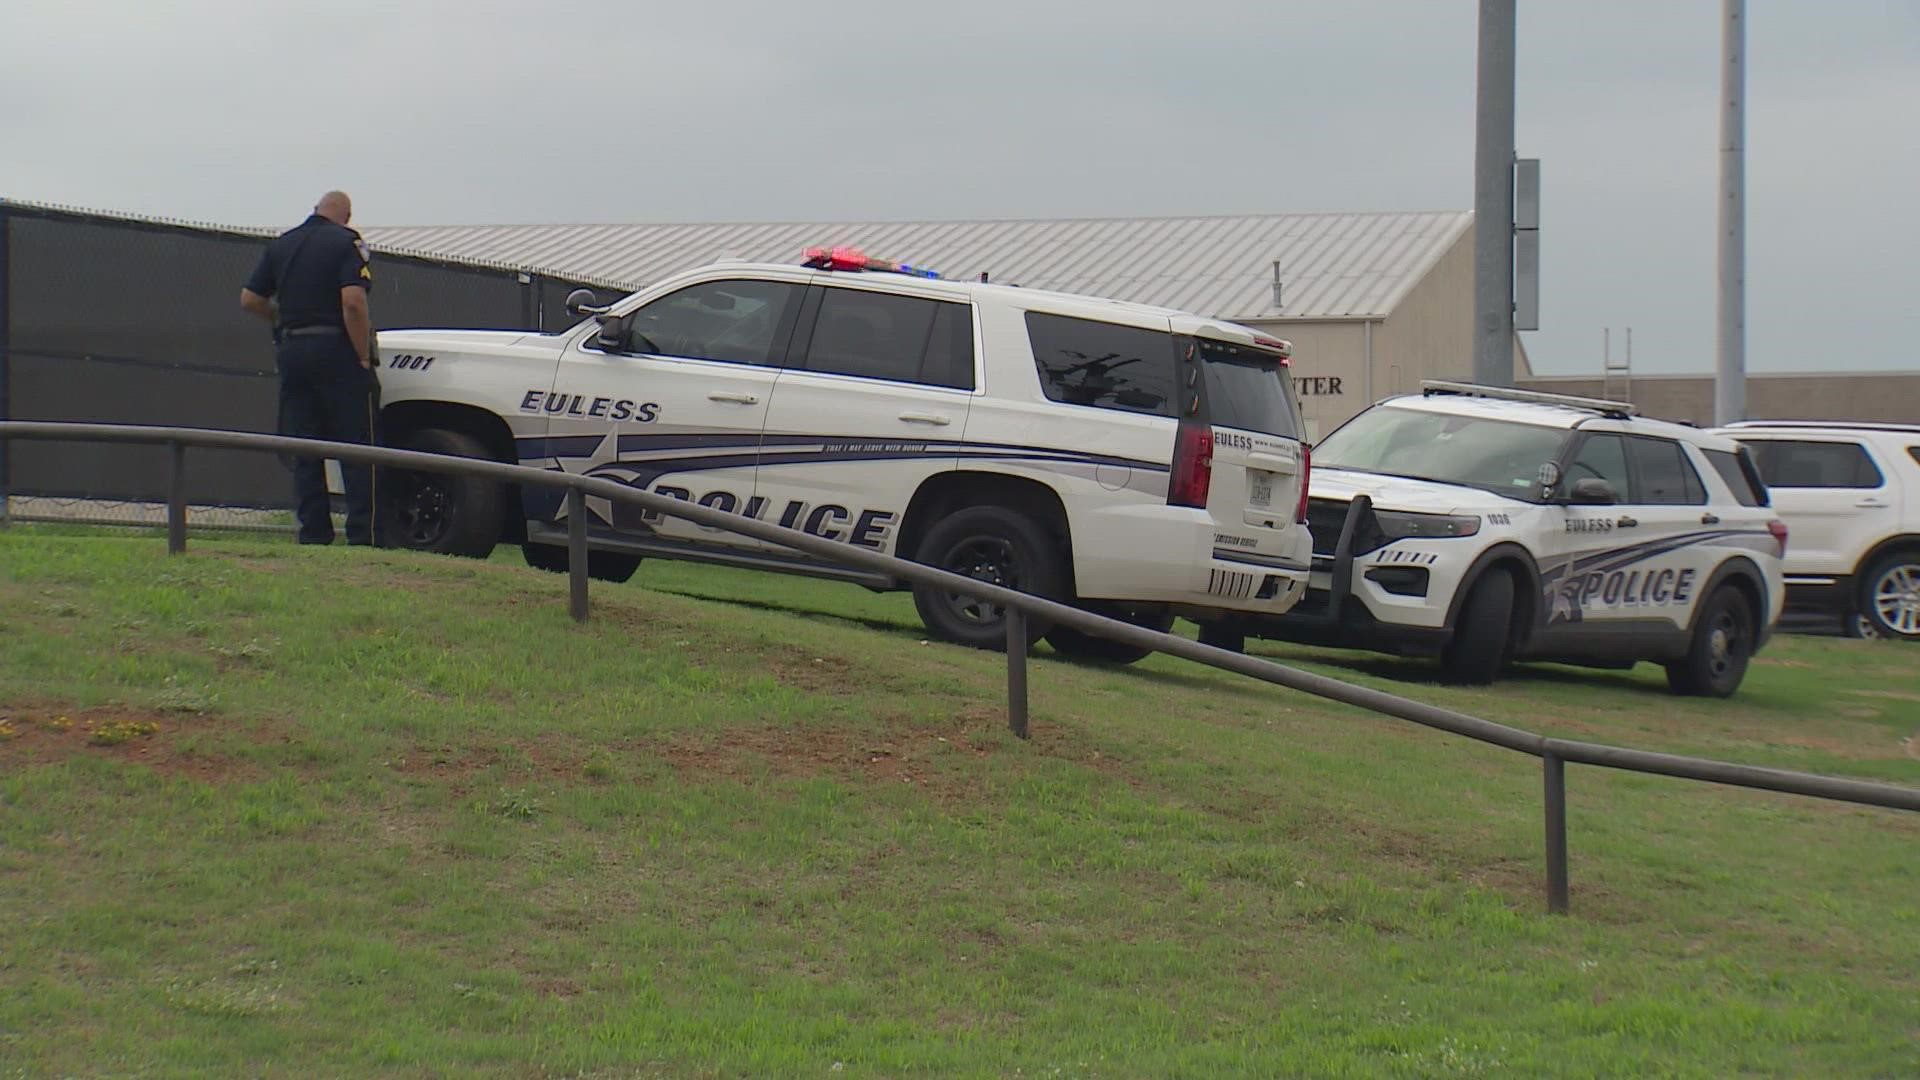 Trinity High School in Euless was evacuated as police investigated a threat Thursday morning, officials said. A 16-year-old student was arrested.